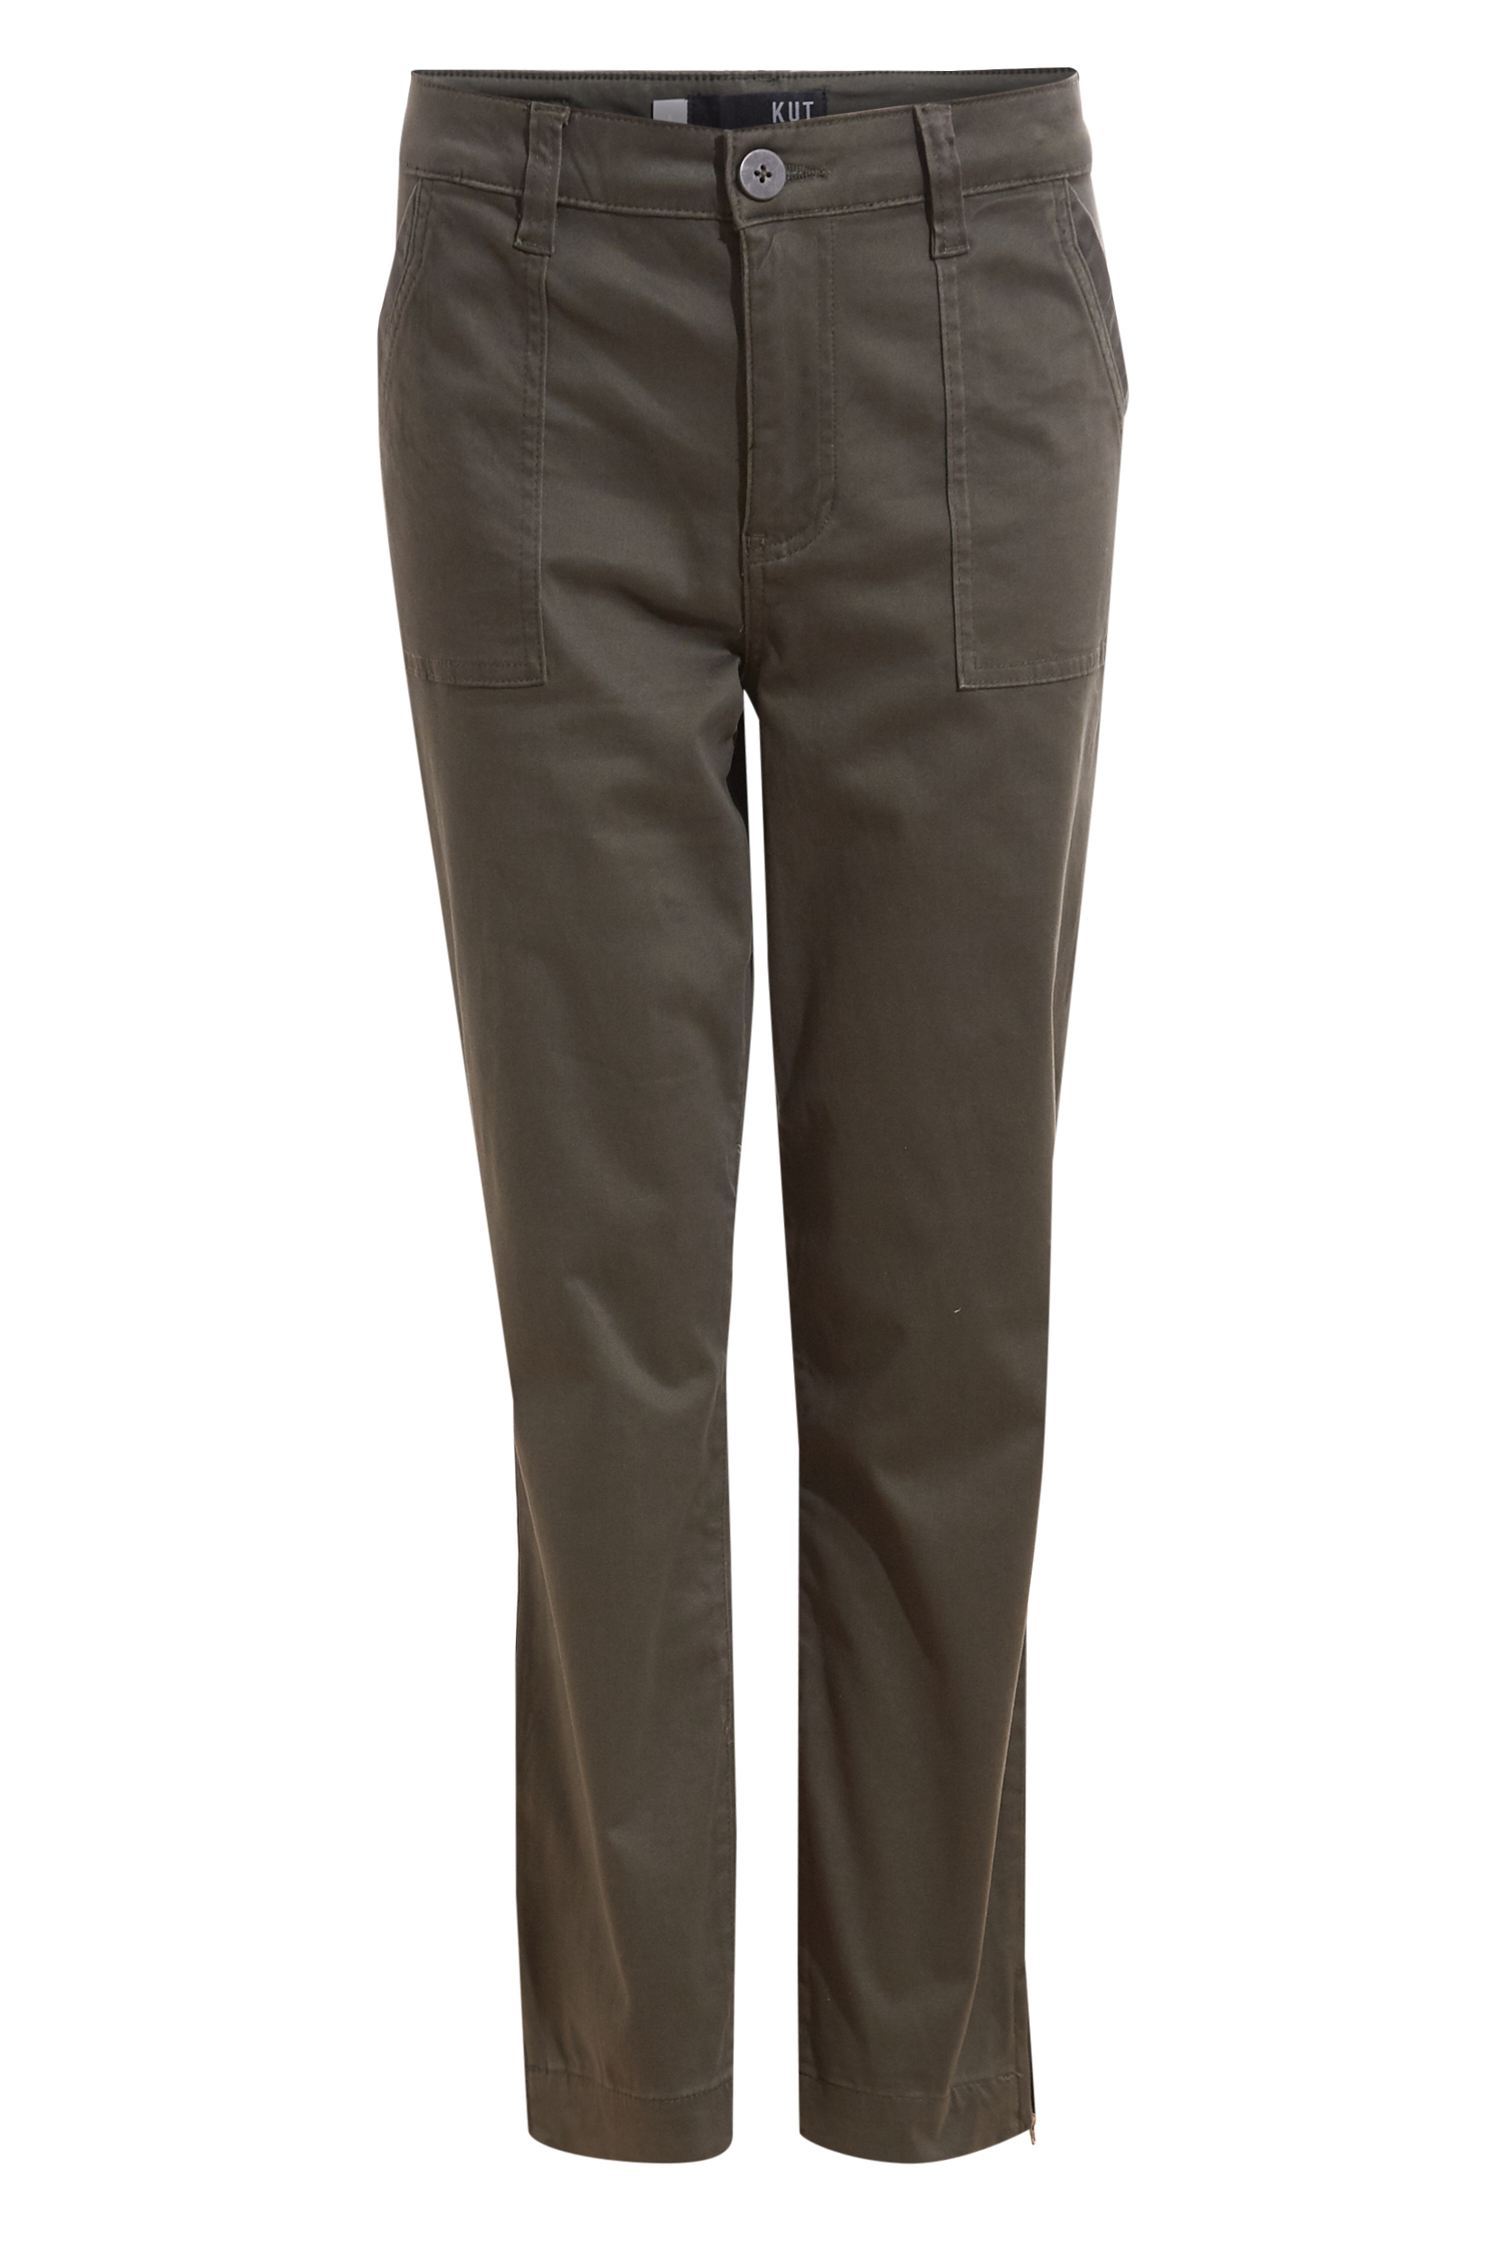 KUT from the Kloth High Rise Utility Pant in Olive | DAILYLOOK